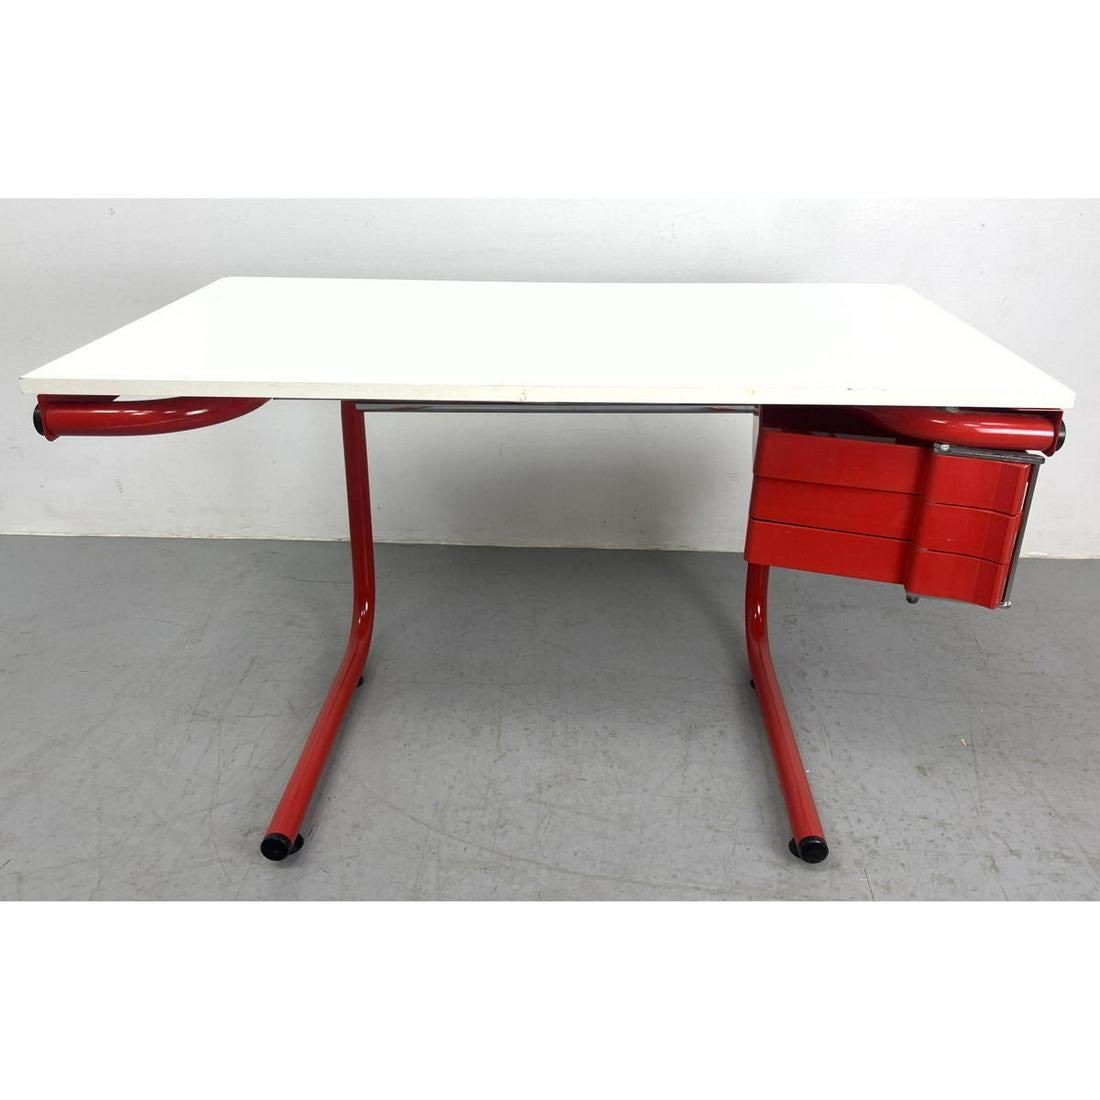 Joe Colombo, Pupil desk, 1970's Bieffeplast Italy. Drafting table with swing out drawers. Made in